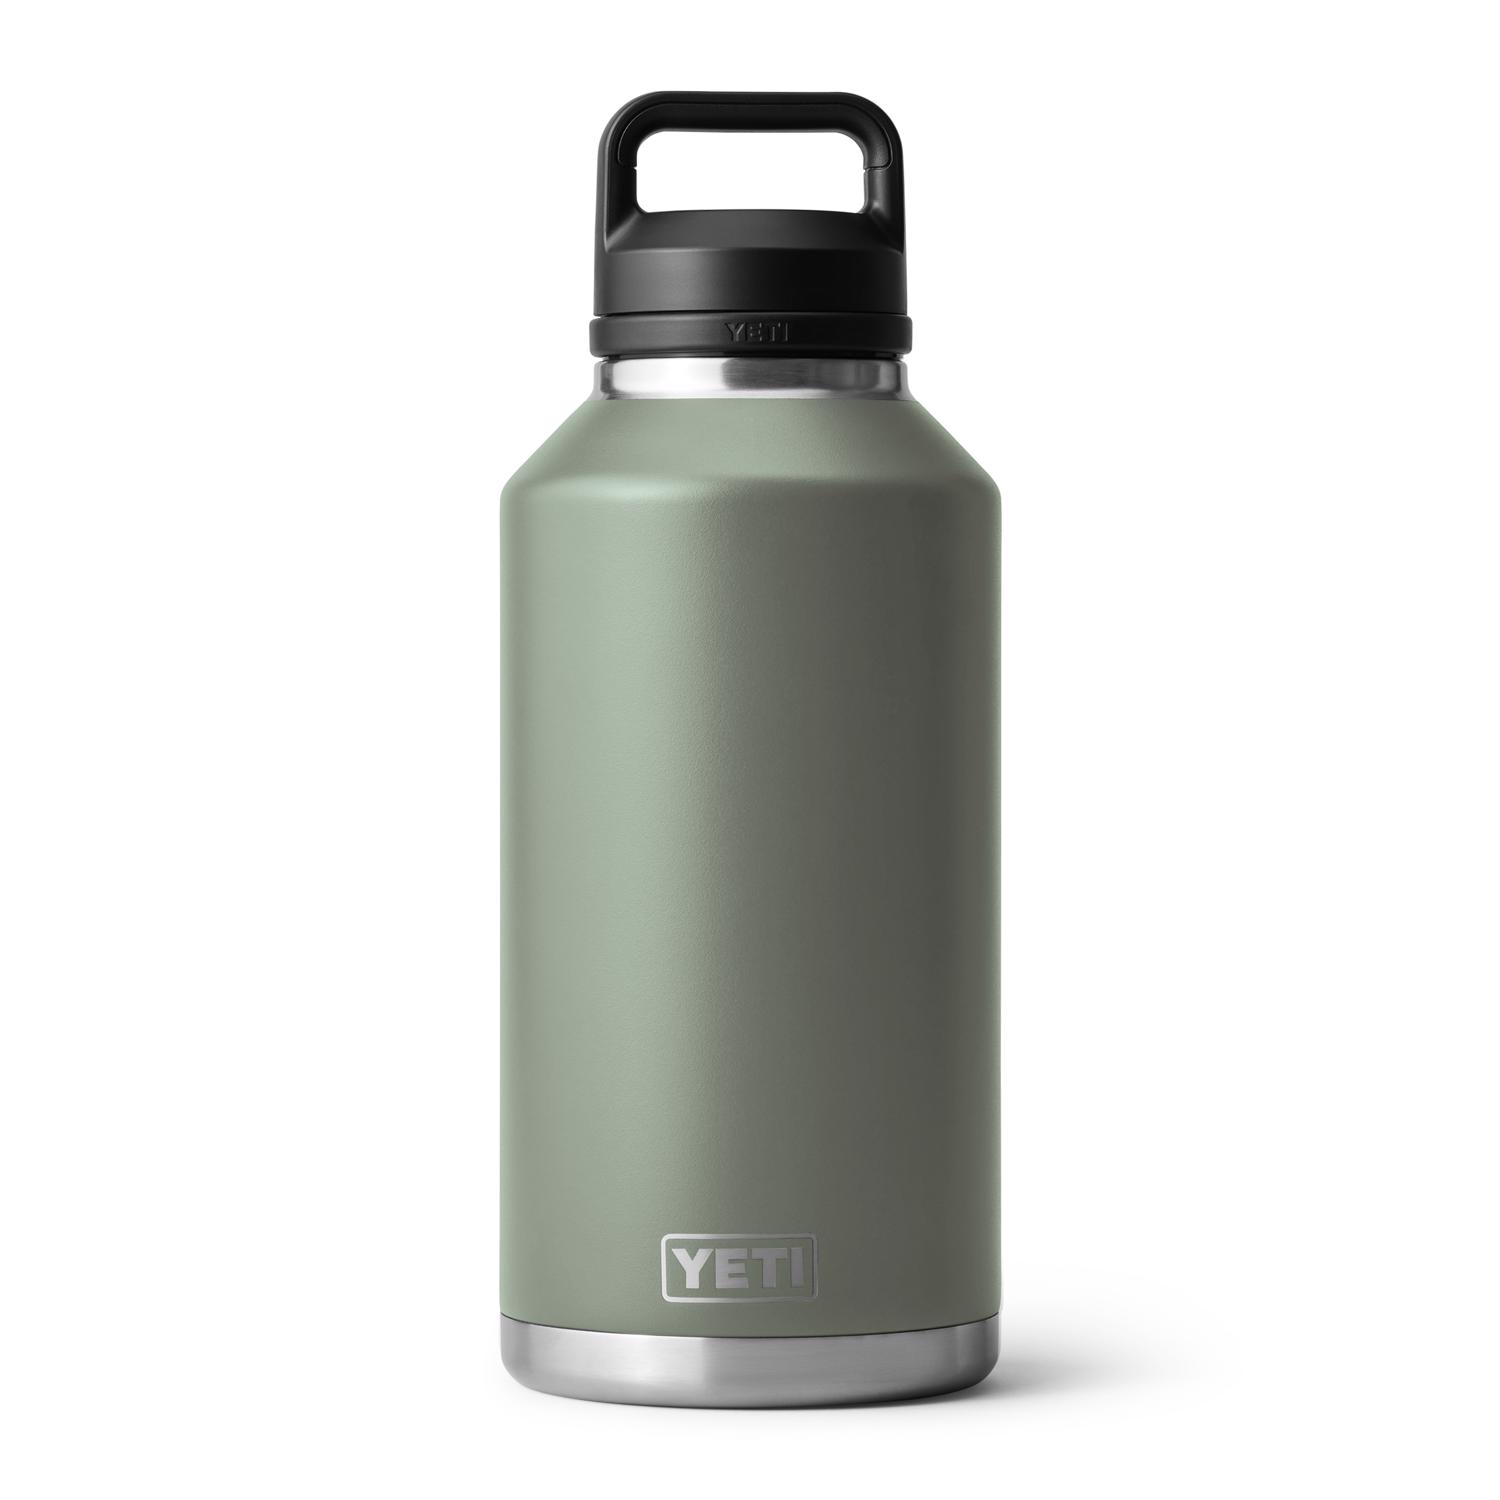 Photos - Other Accessories Yeti Rambler 64 oz Camp Green BPA Free Bottle with Chug Cap 21071501703 